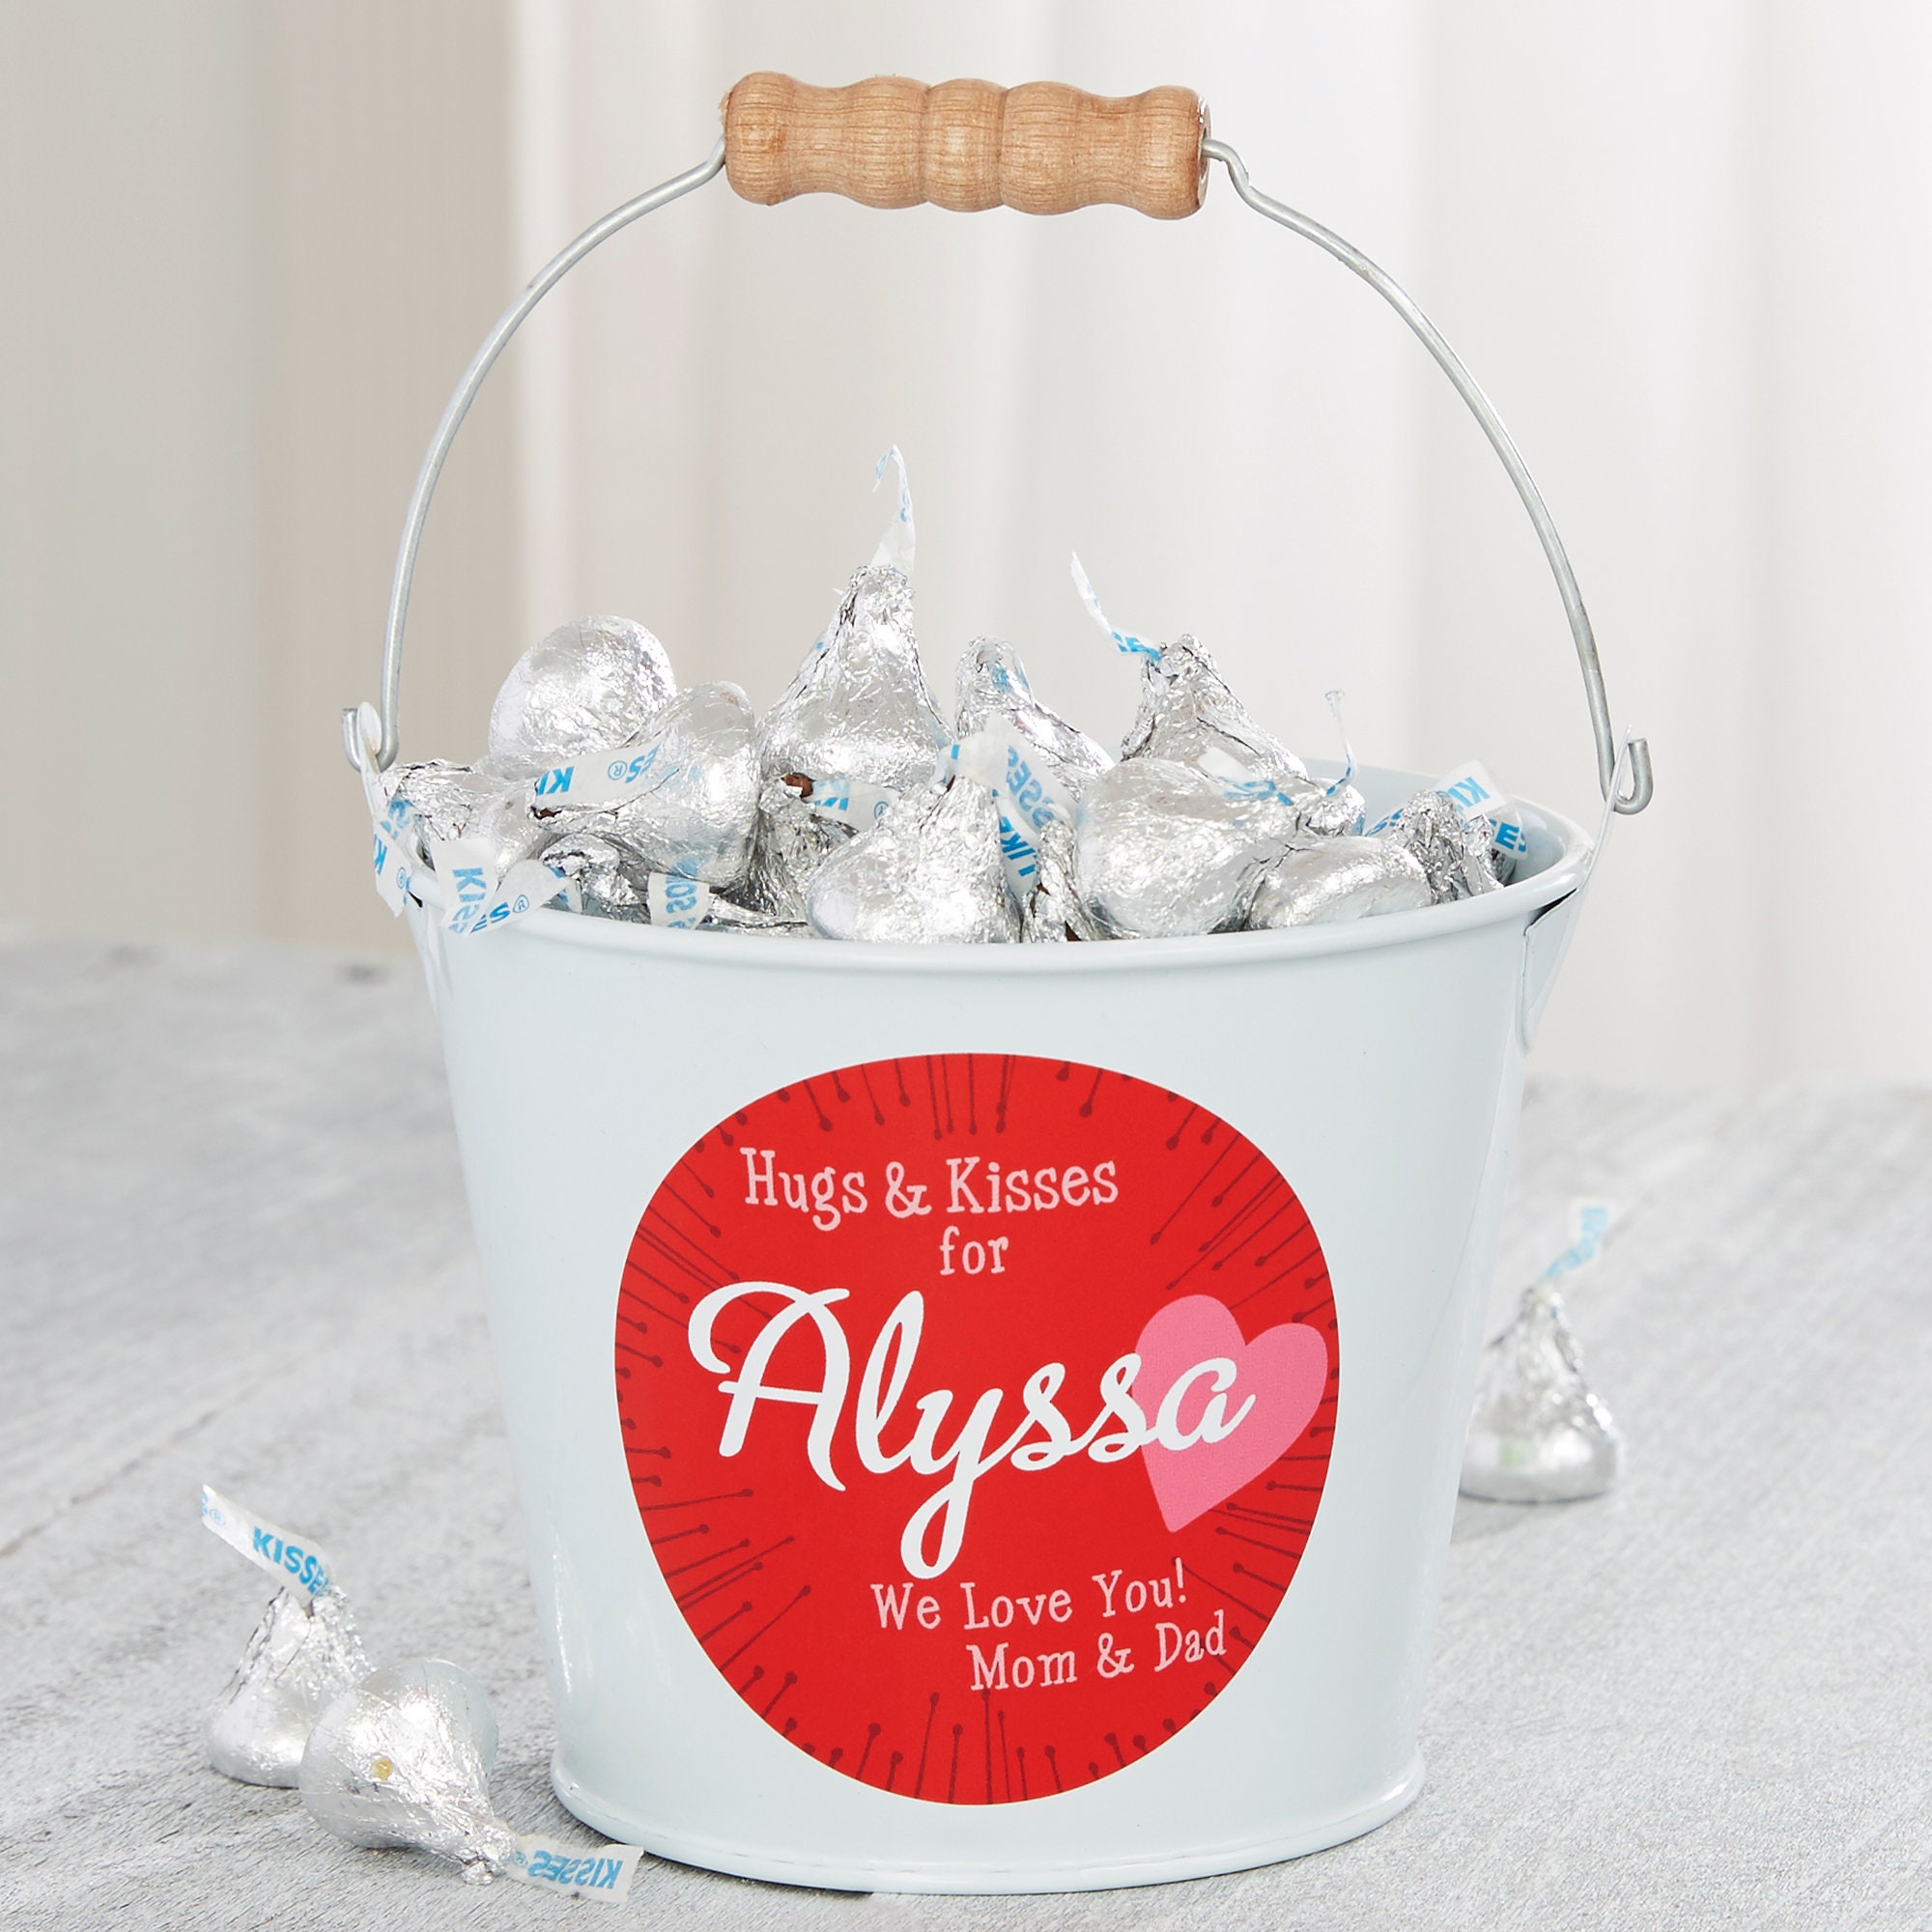 Hugs & Kisses Personalized Treat Bucket, Romantic Gifts, Custom Valentine's  Day Gifts, Valentine's Day Gifts for Kids 